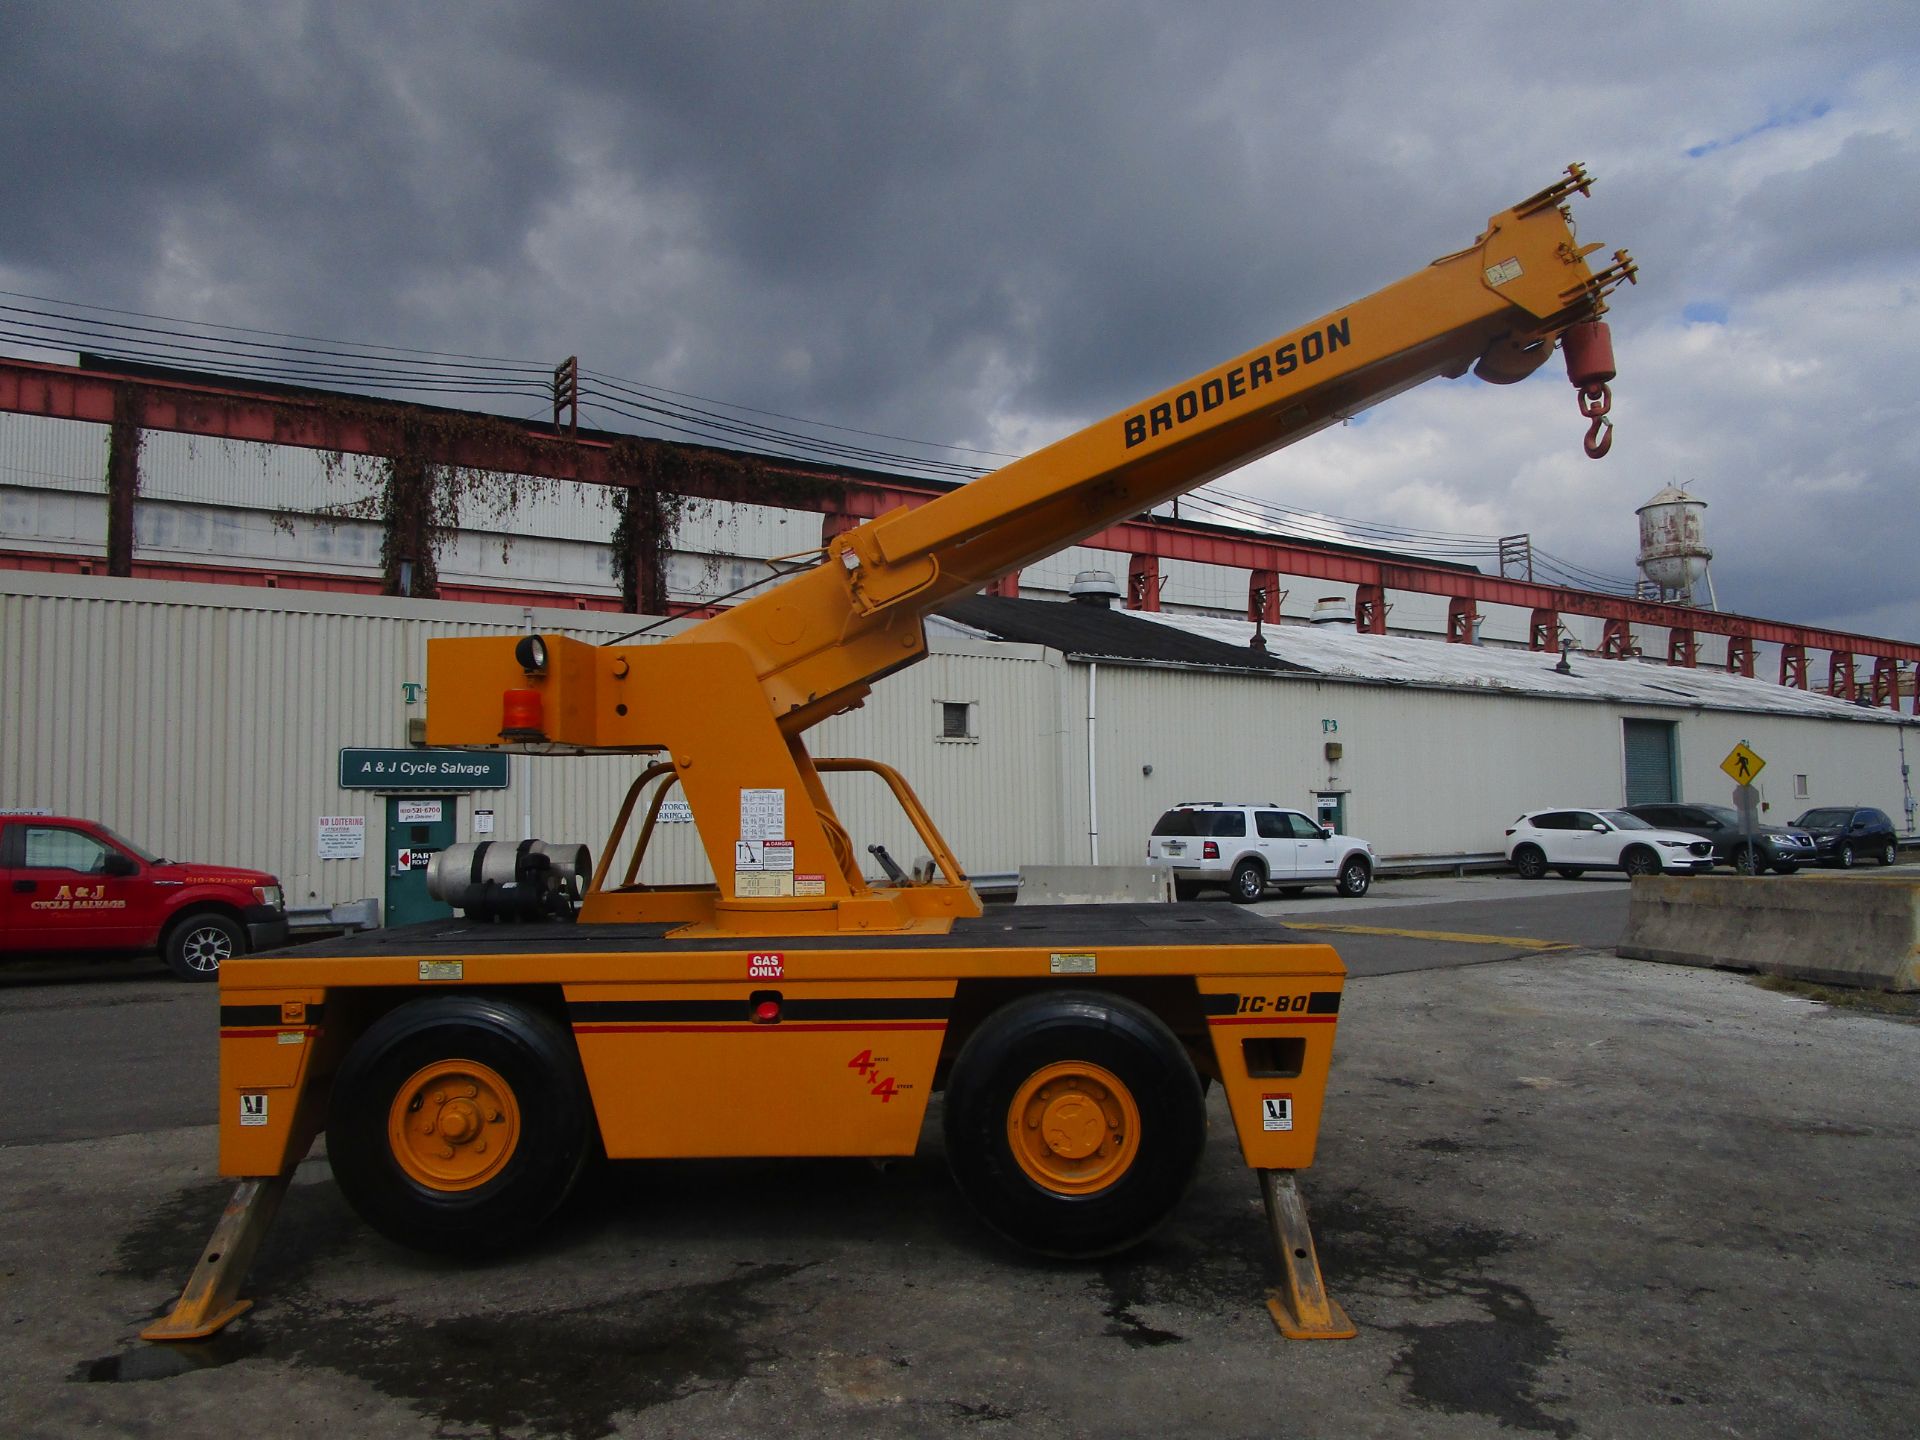 Broderson IC-80-3G Crane - Located in Lester, PA - Image 10 of 24